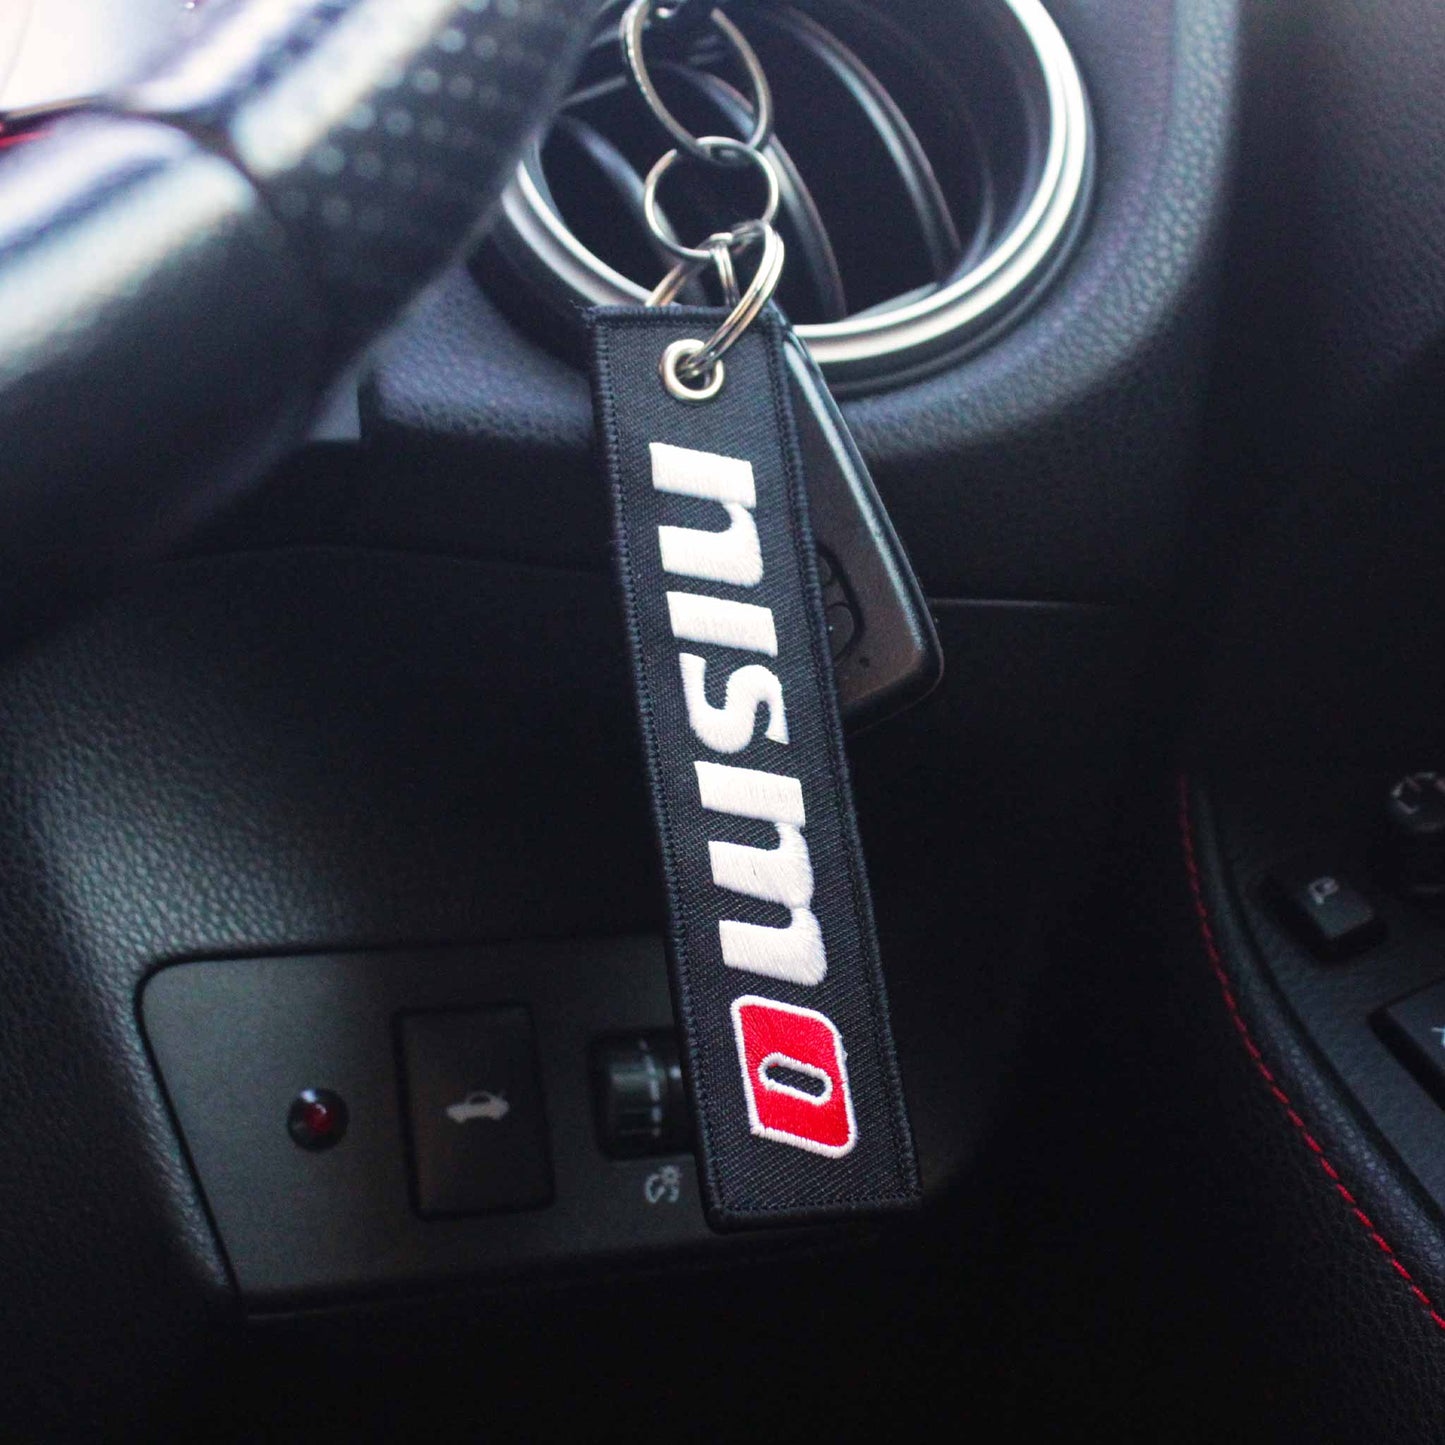 A nismo jet tag hung on a steering wheel control stick